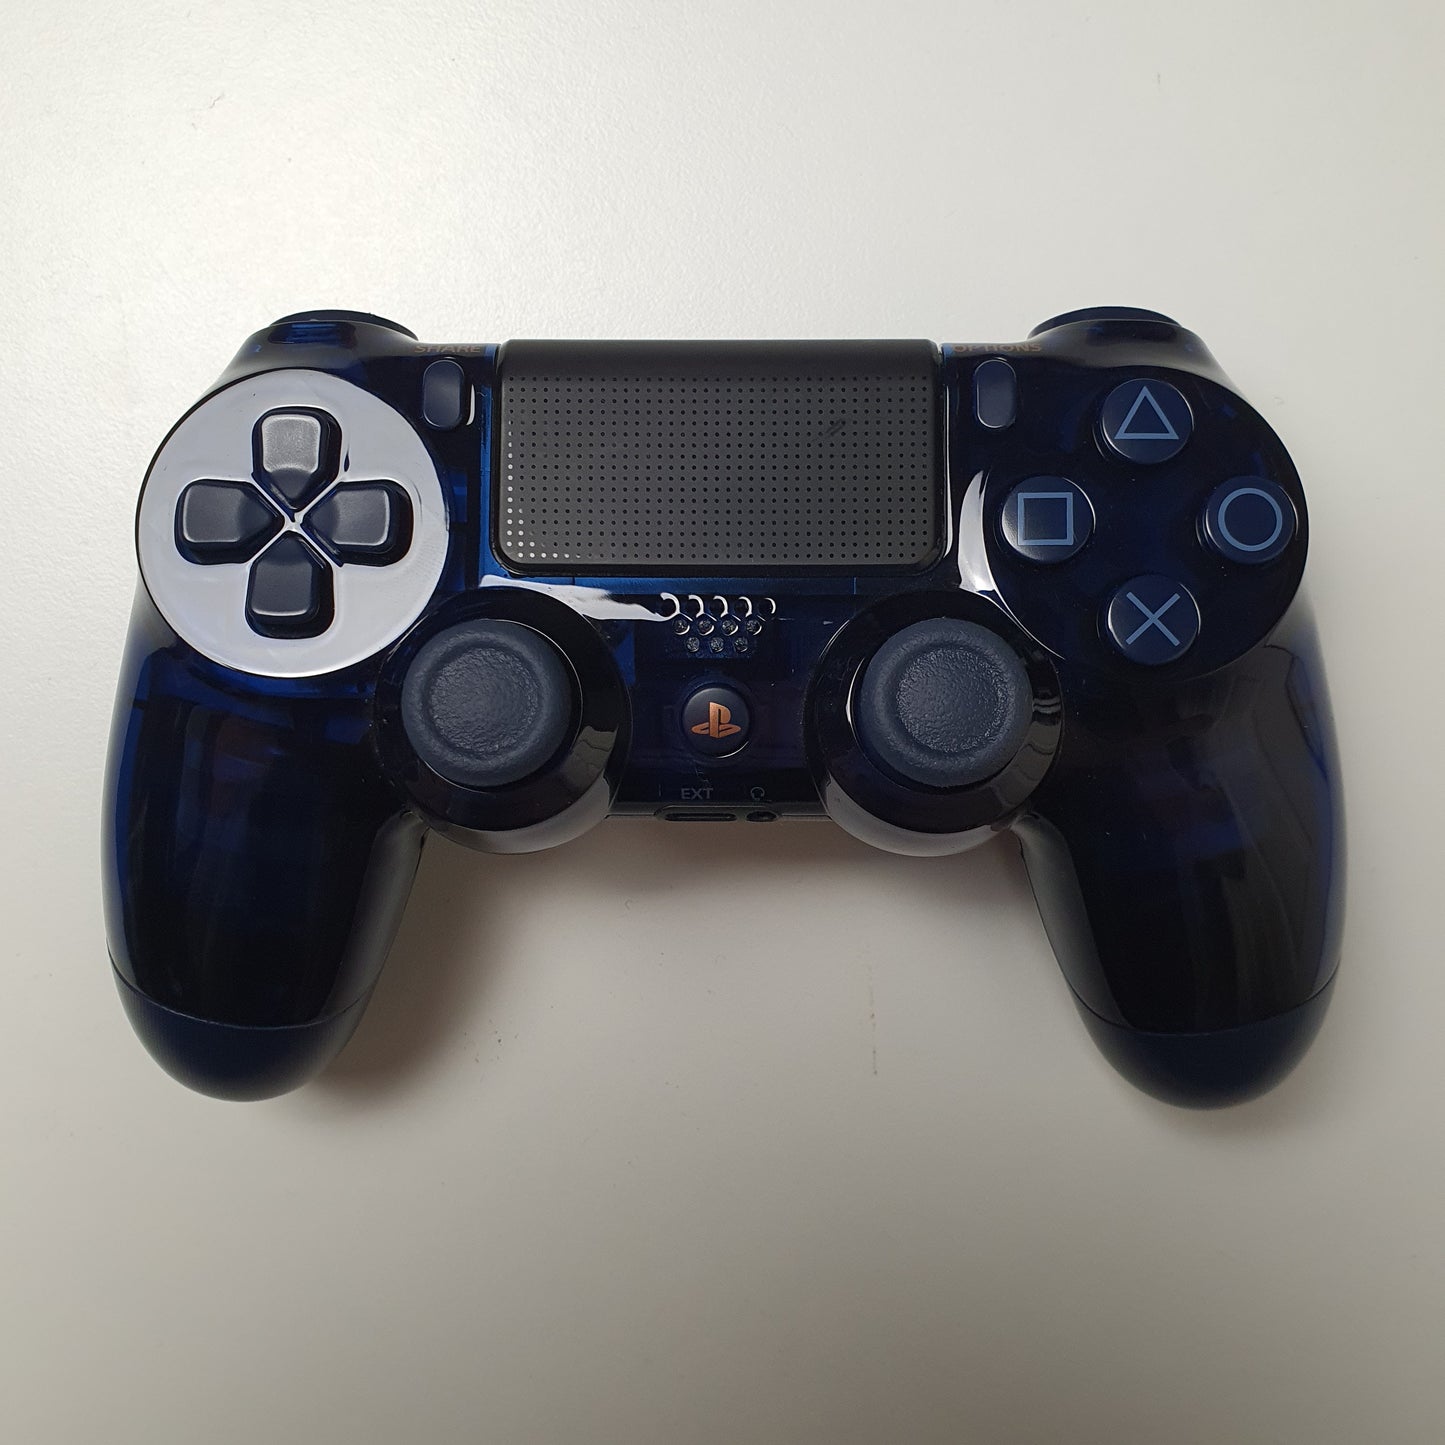 Official Sony PlayStation PS4 500 Million Edition DualShock 4 Controller